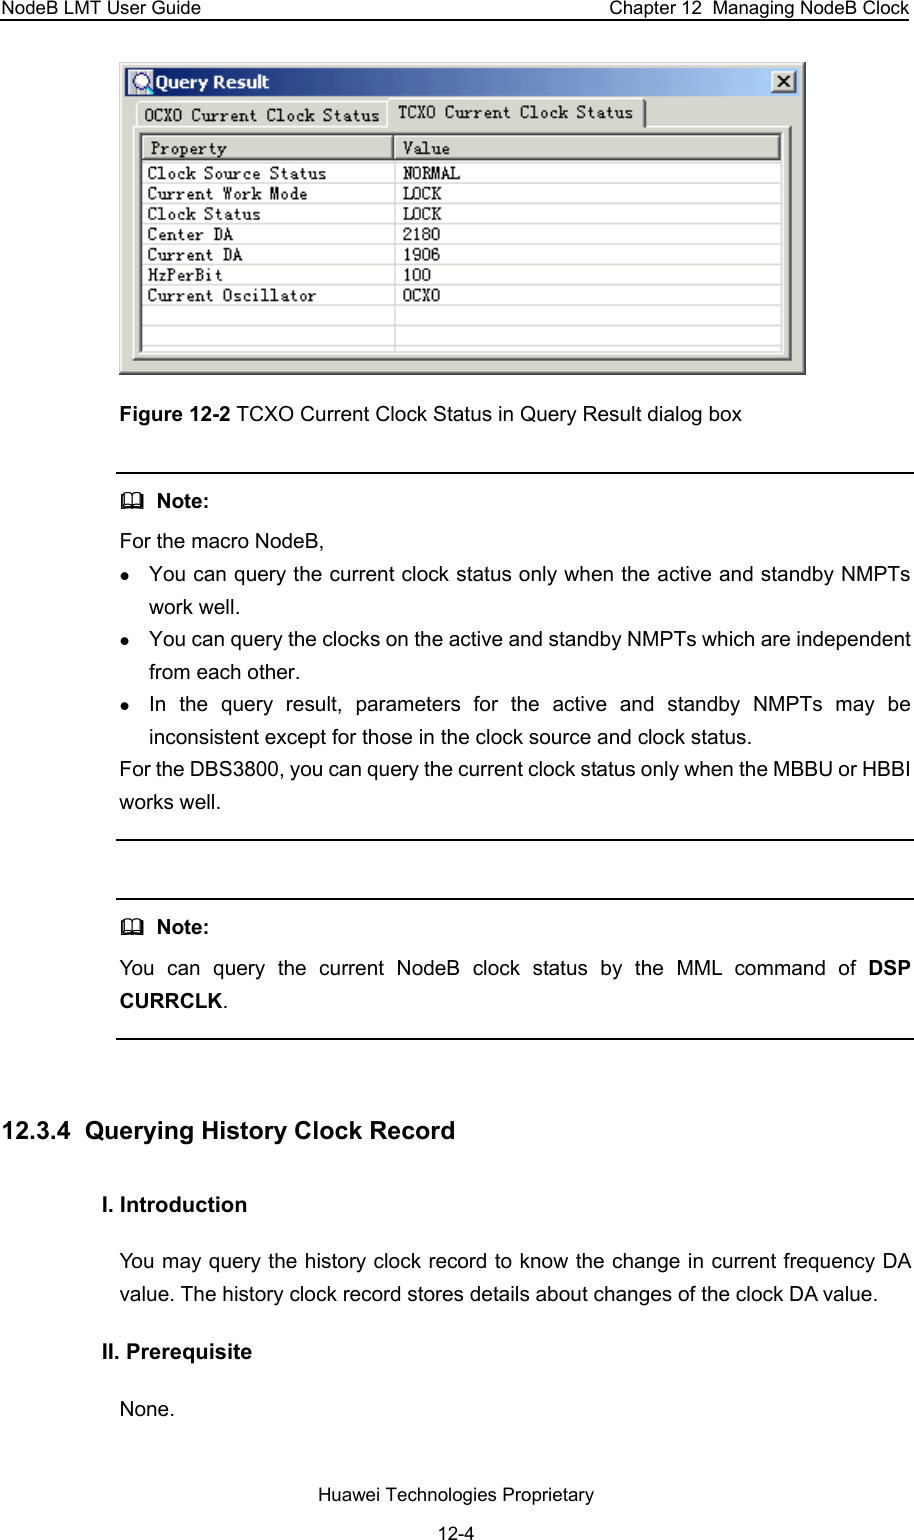 NodeB LMT User Guide  Chapter 12  Managing NodeB Clock  Figure 12-2 TCXO Current Clock Status in Query Result dialog box   Note:  For the macro NodeB,  z You can query the current clock status only when the active and standby NMPTs work well.  z You can query the clocks on the active and standby NMPTs which are independent from each other.  z In the query result, parameters for the active and standby NMPTs may be inconsistent except for those in the clock source and clock status. For the DBS3800, you can query the current clock status only when the MBBU or HBBI works well.     Note:  You can query the current NodeB clock status by the MML command of DSP CURRCLK.  12.3.4  Querying History Clock Record I. Introduction  You may query the history clock record to know the change in current frequency DA value. The history clock record stores details about changes of the clock DA value.  II. Prerequisite None.  Huawei Technologies Proprietary 12-4 